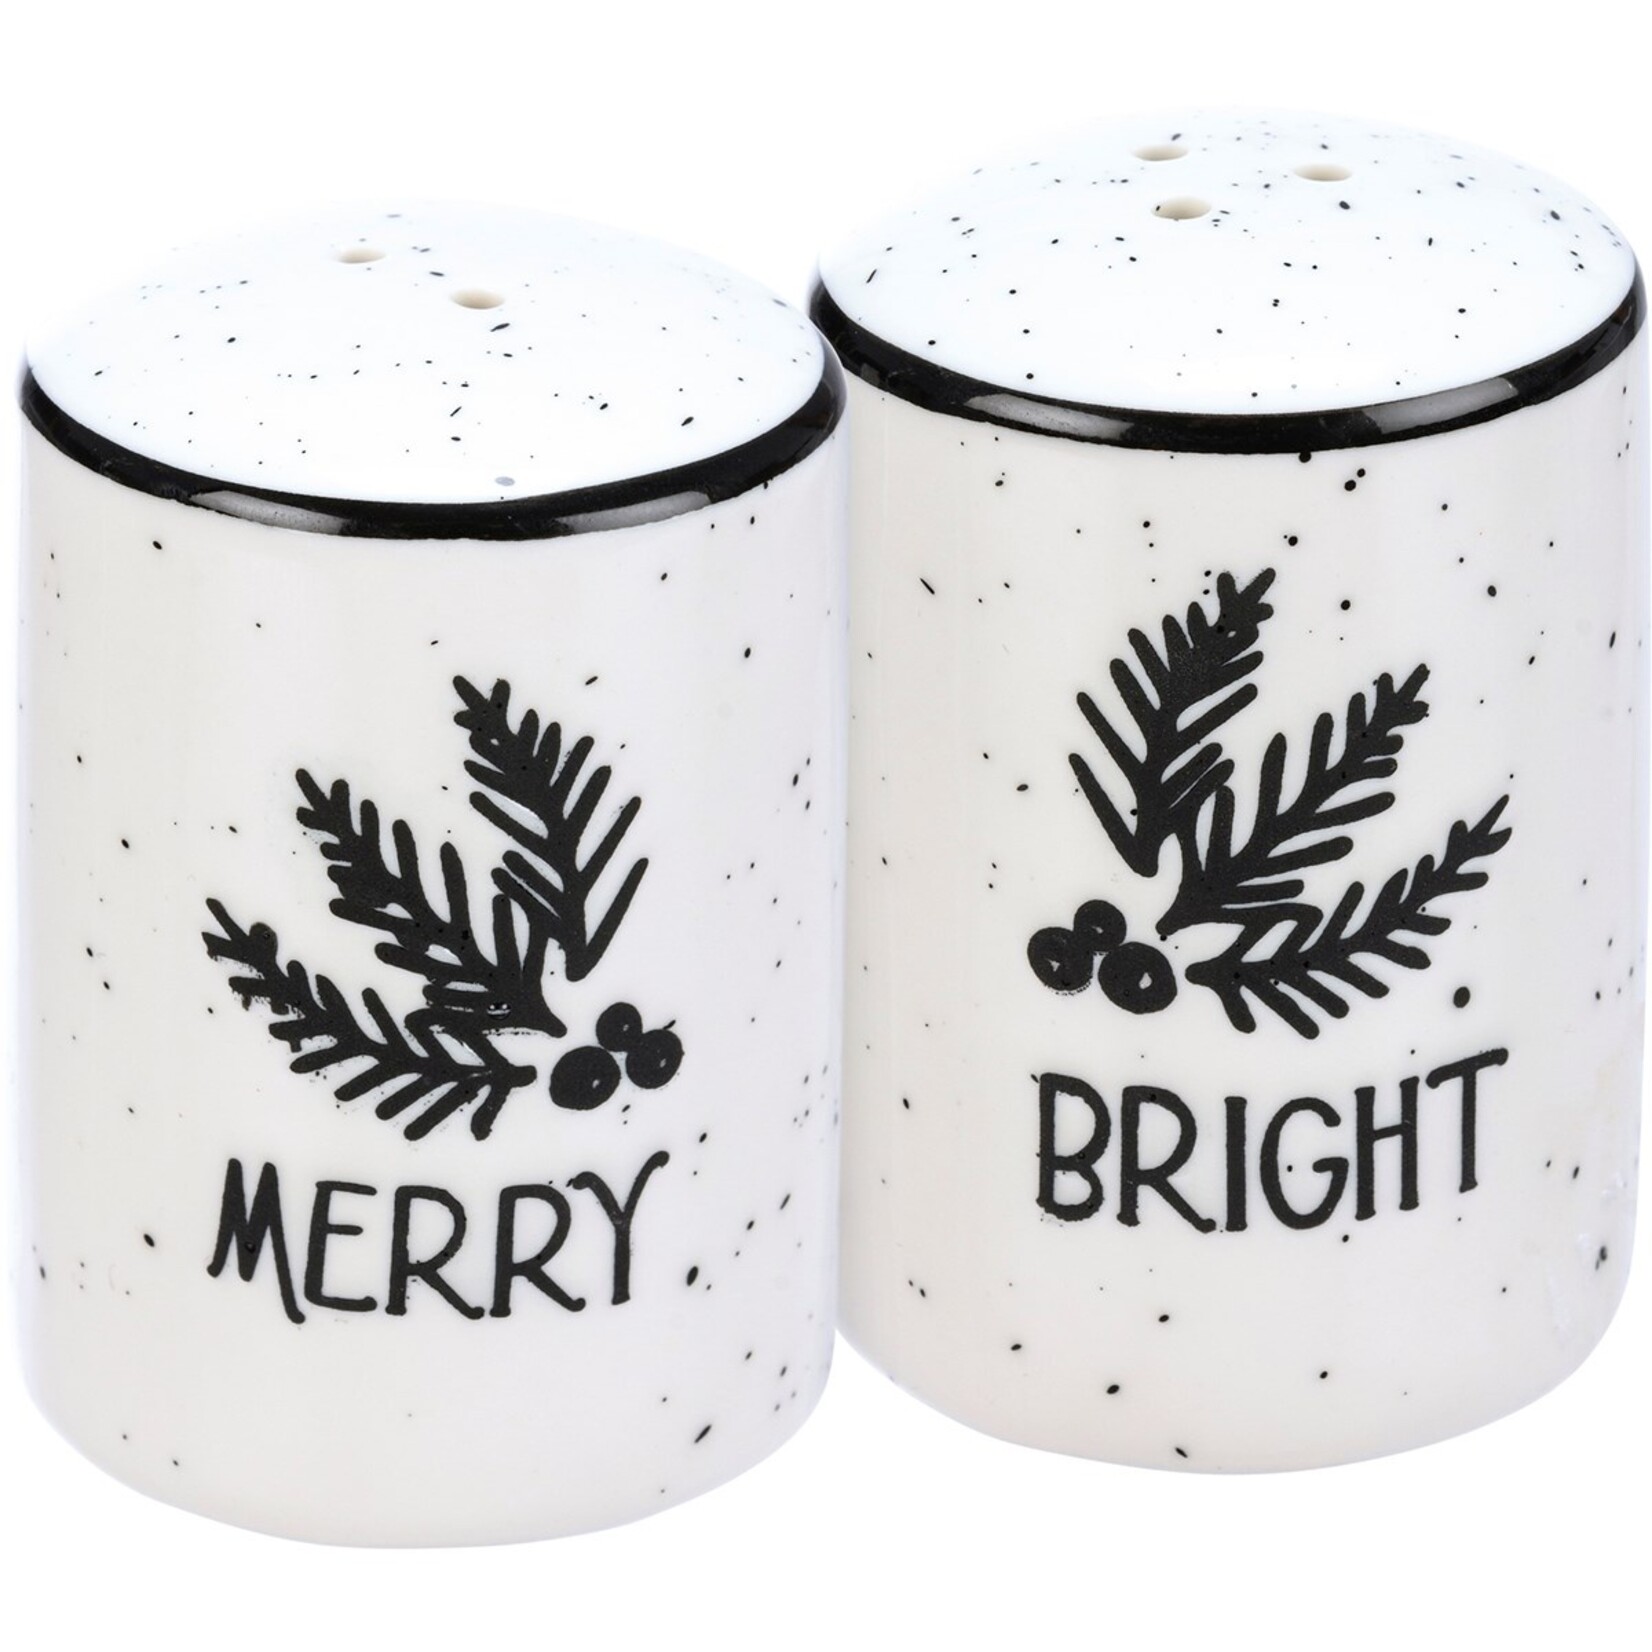 Primitives by Kathy Primitives by Kathy- Merry Bright Salt And Pepper Set